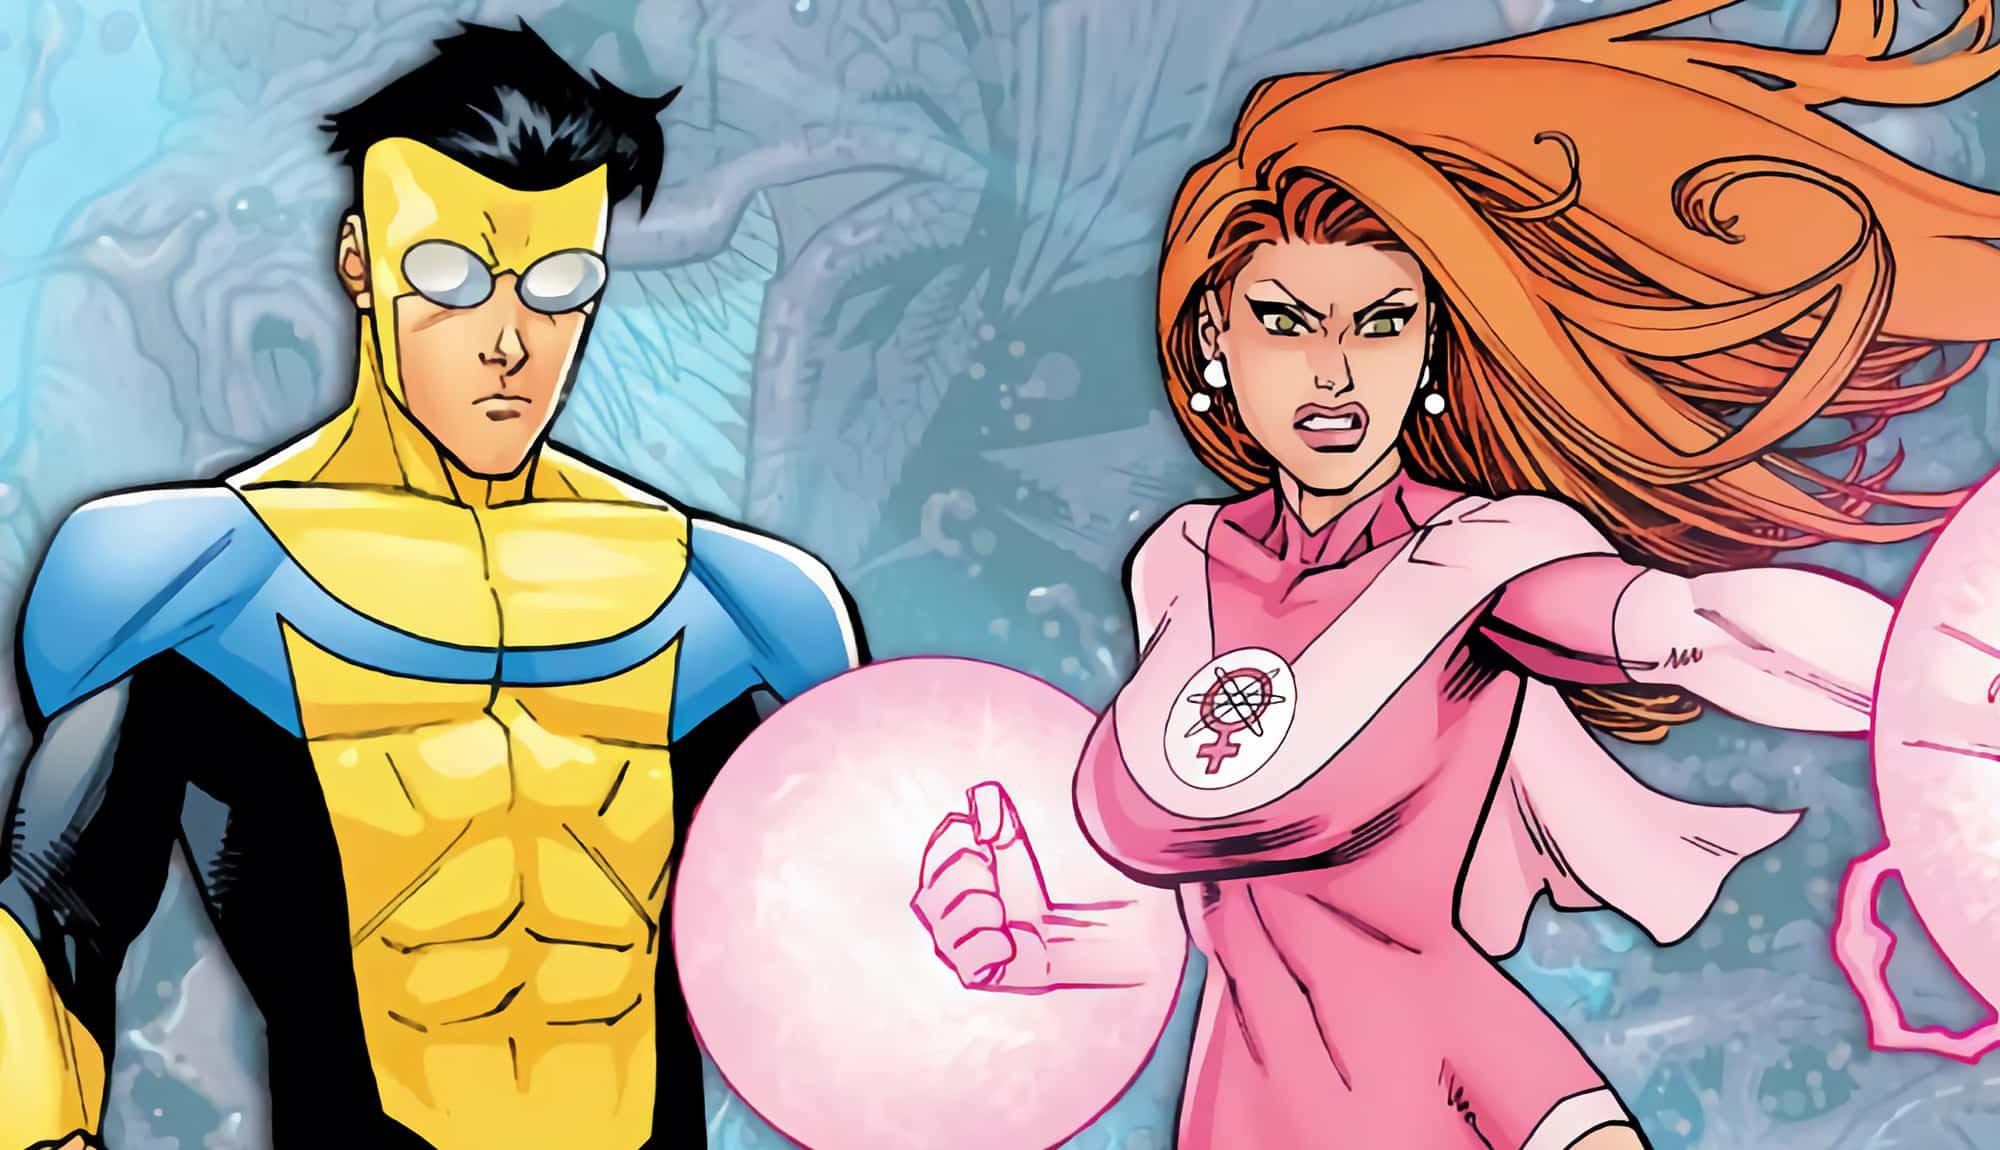 Invincible The Animated Series Greenlit!